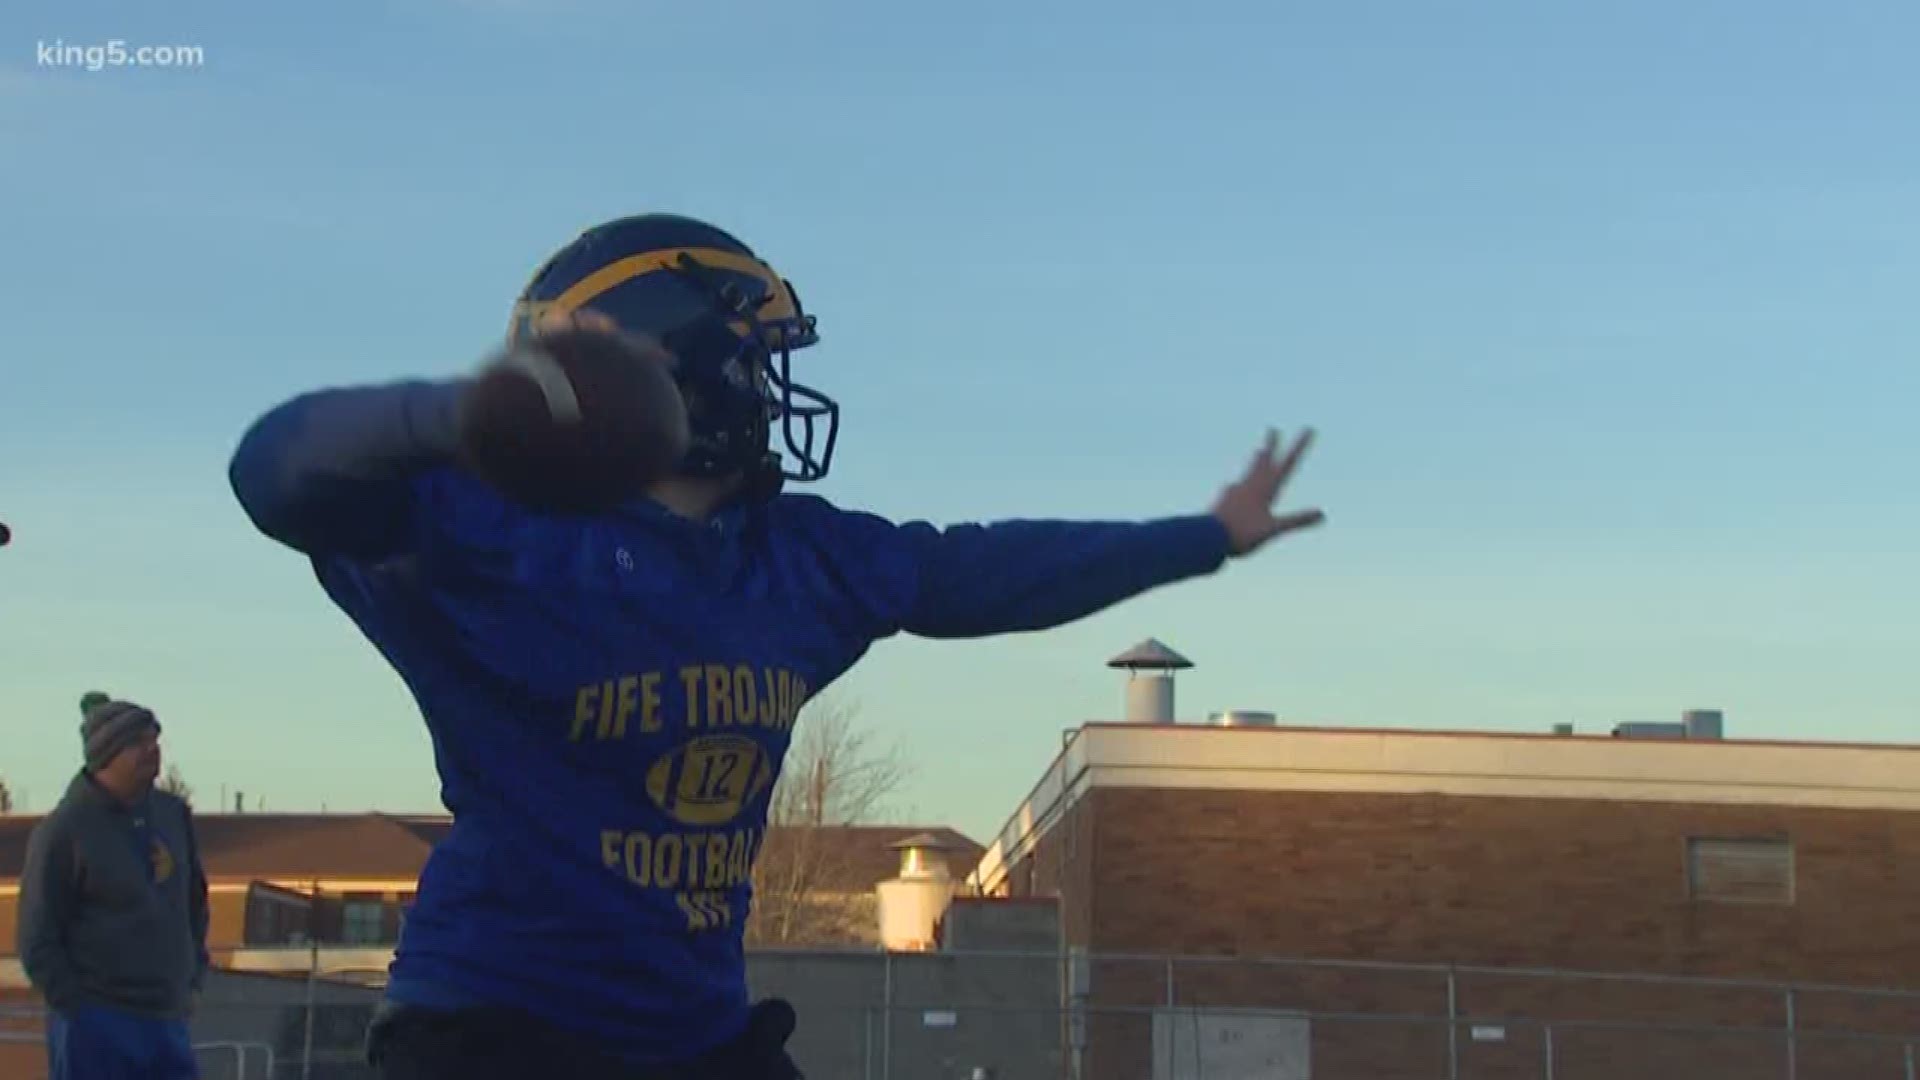 Brynna Nixon made history last Friday night as the first female quarterback for Fife High School to throw a touchdown pass in a varsity game.